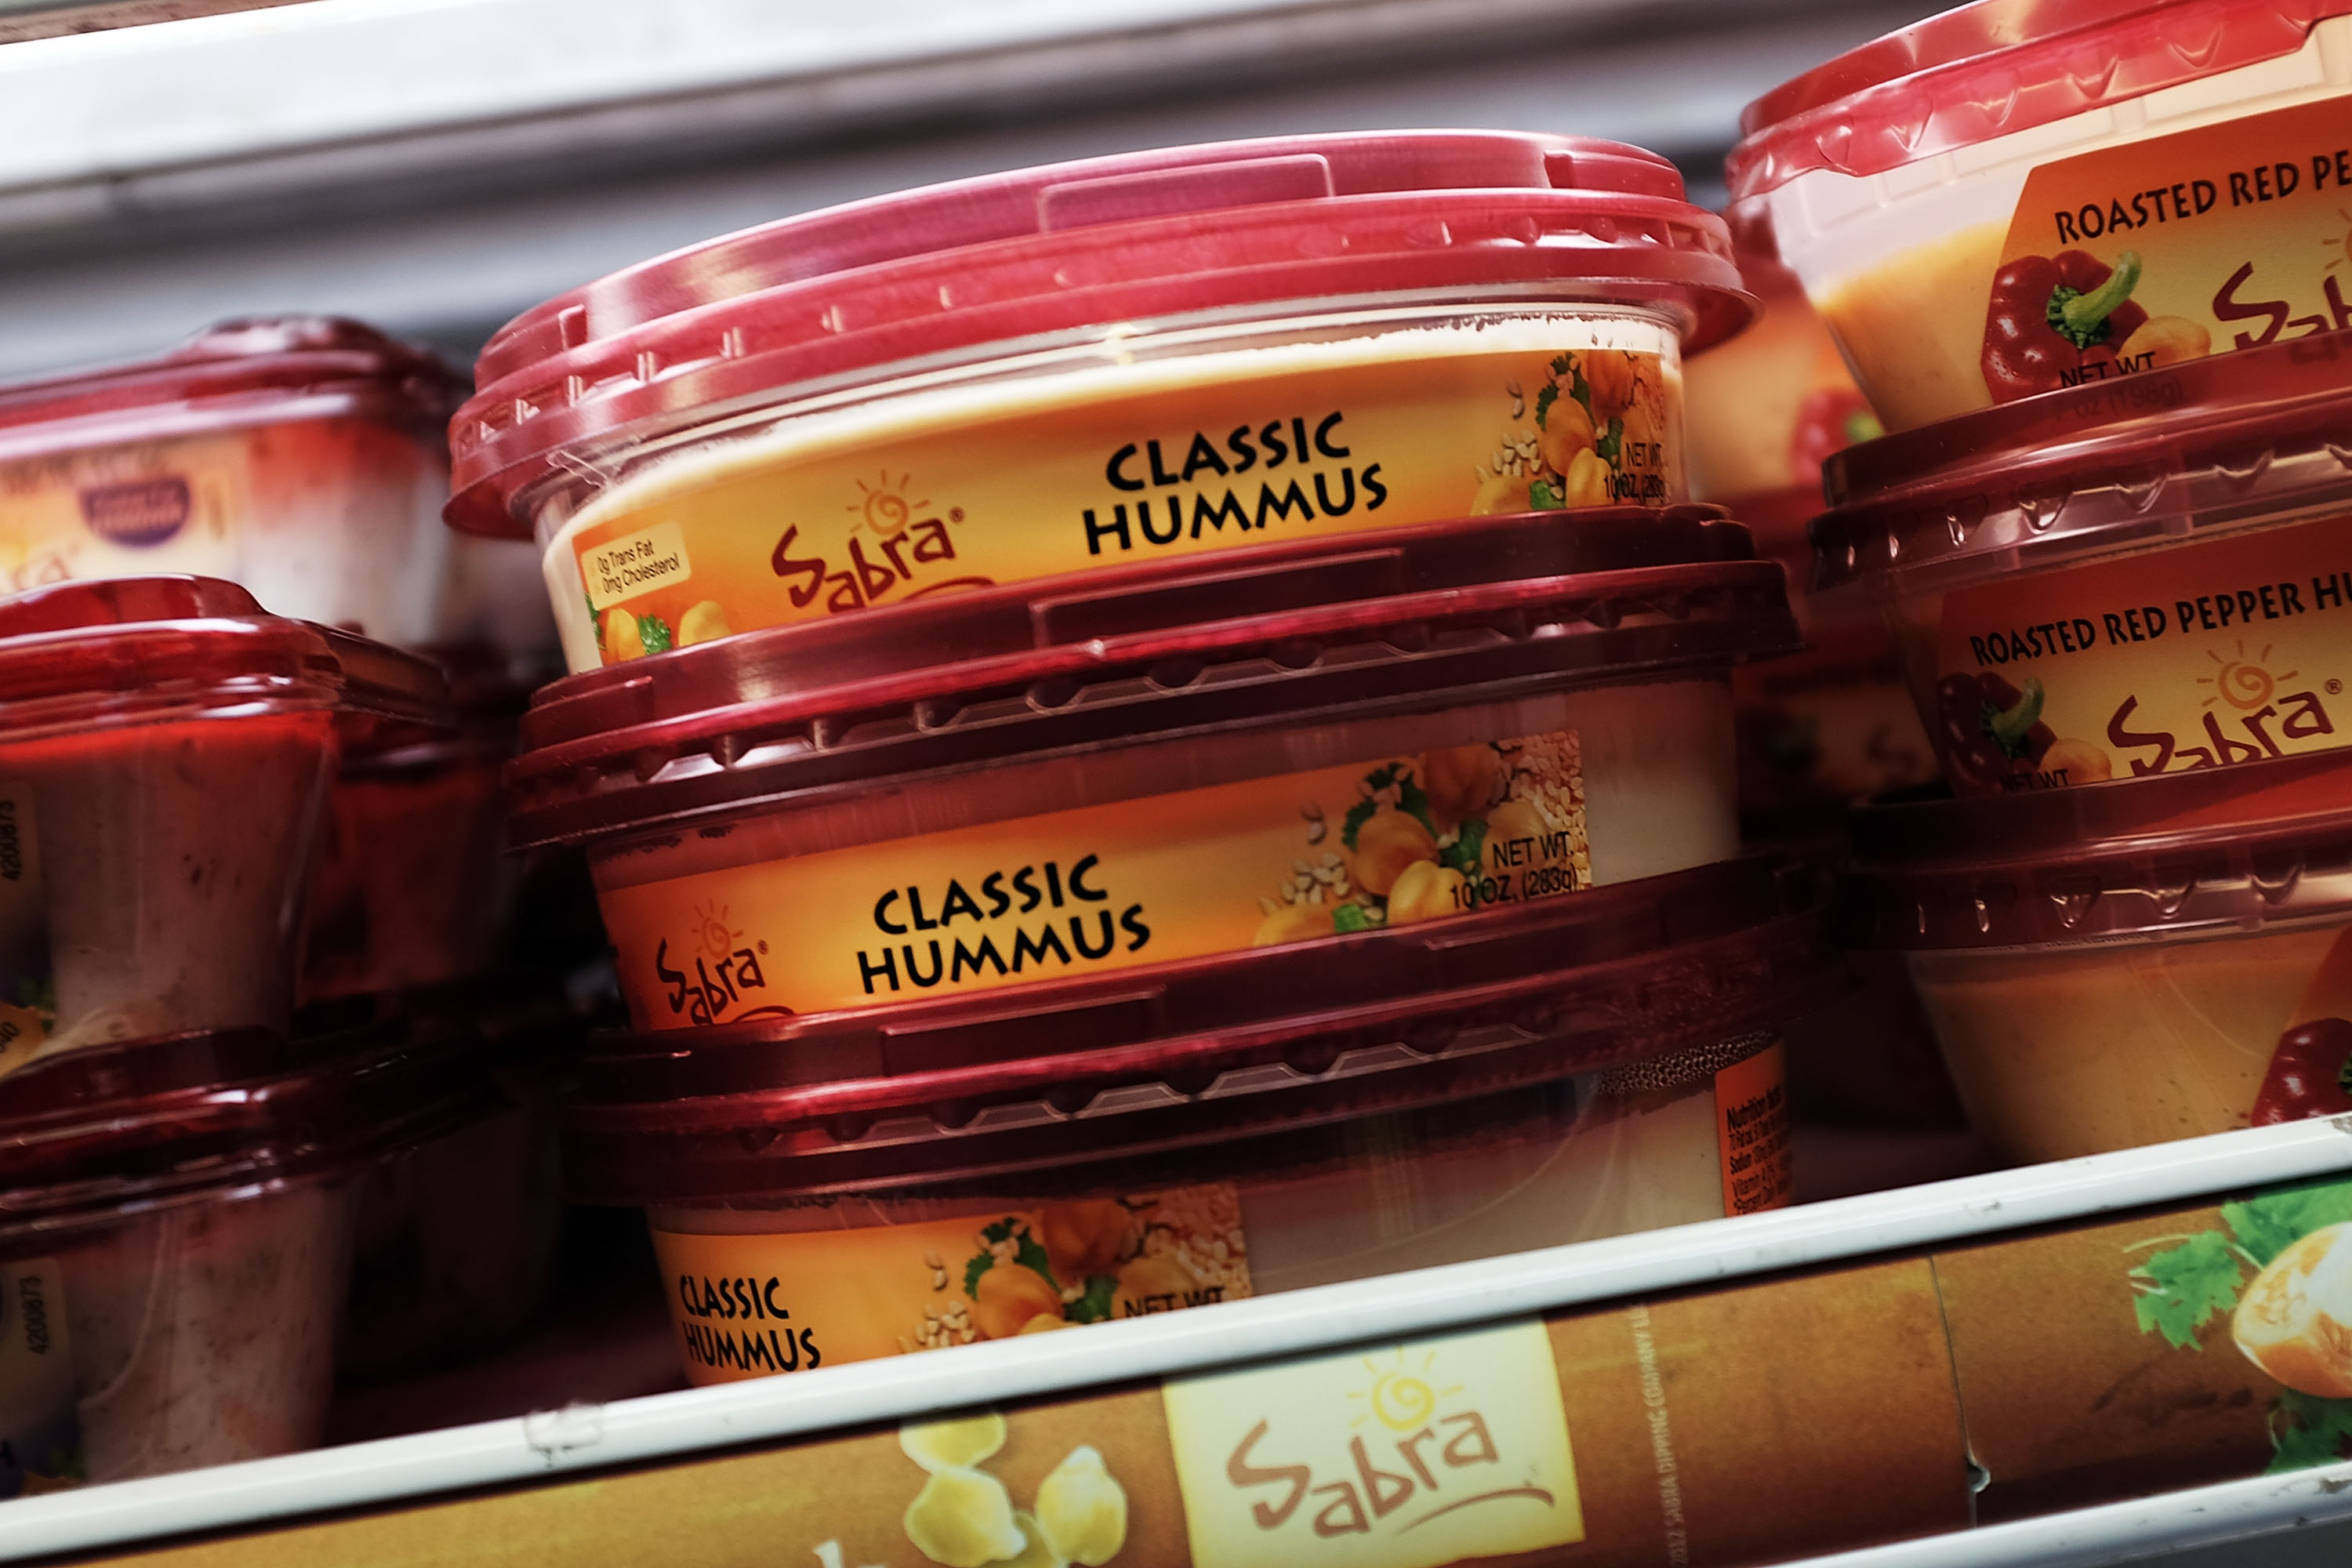 Cases of Sabra Classic Hummus are viewed on the shelf of a grocery store on April 9, 2015 in New York City. (Spencer Platt—Getty Images)